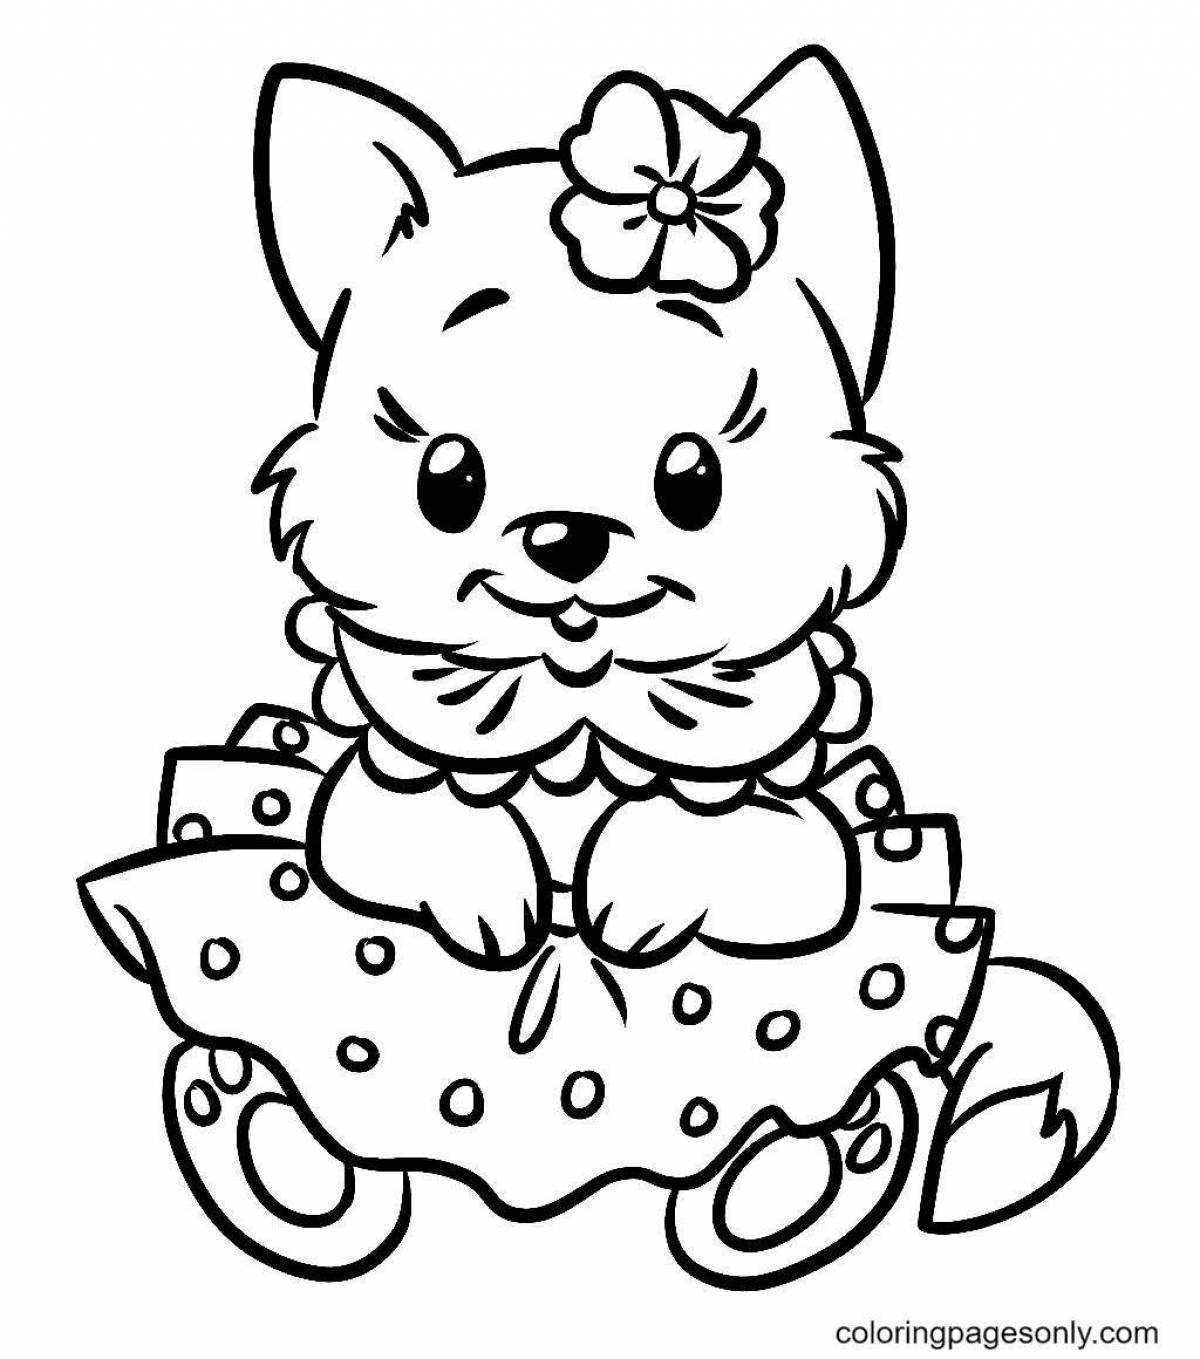 Cute coloring book for girls dogs kittens